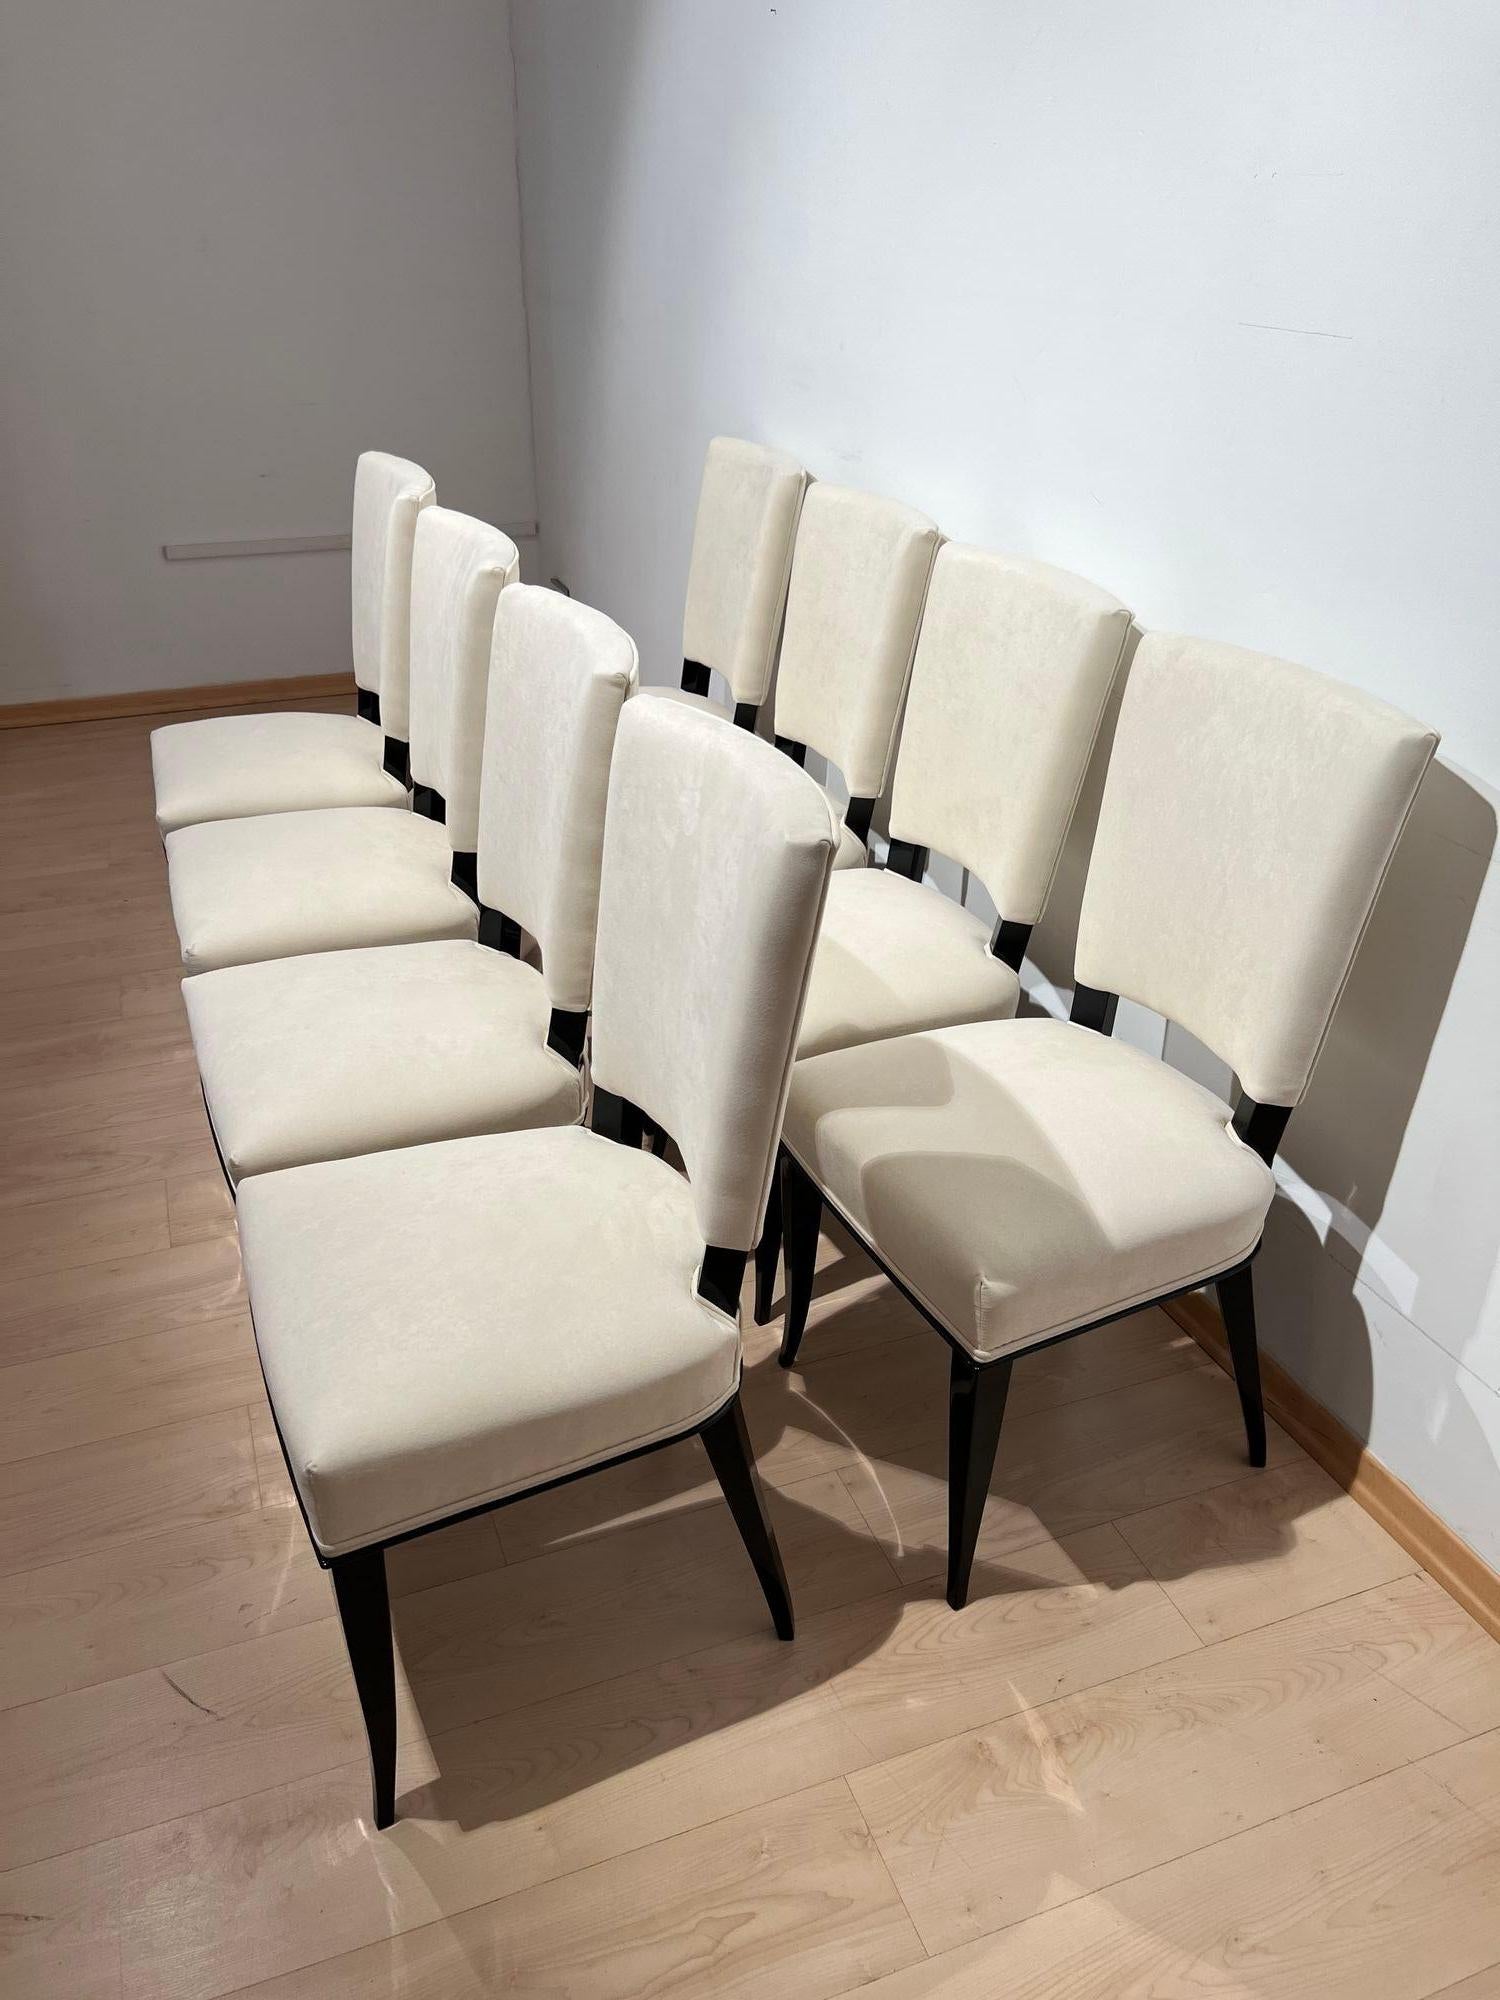 Set of 8 Art Deco Chairs, Black Lacquer, Creme Velour, France circa 1930 In Good Condition For Sale In Regensburg, DE